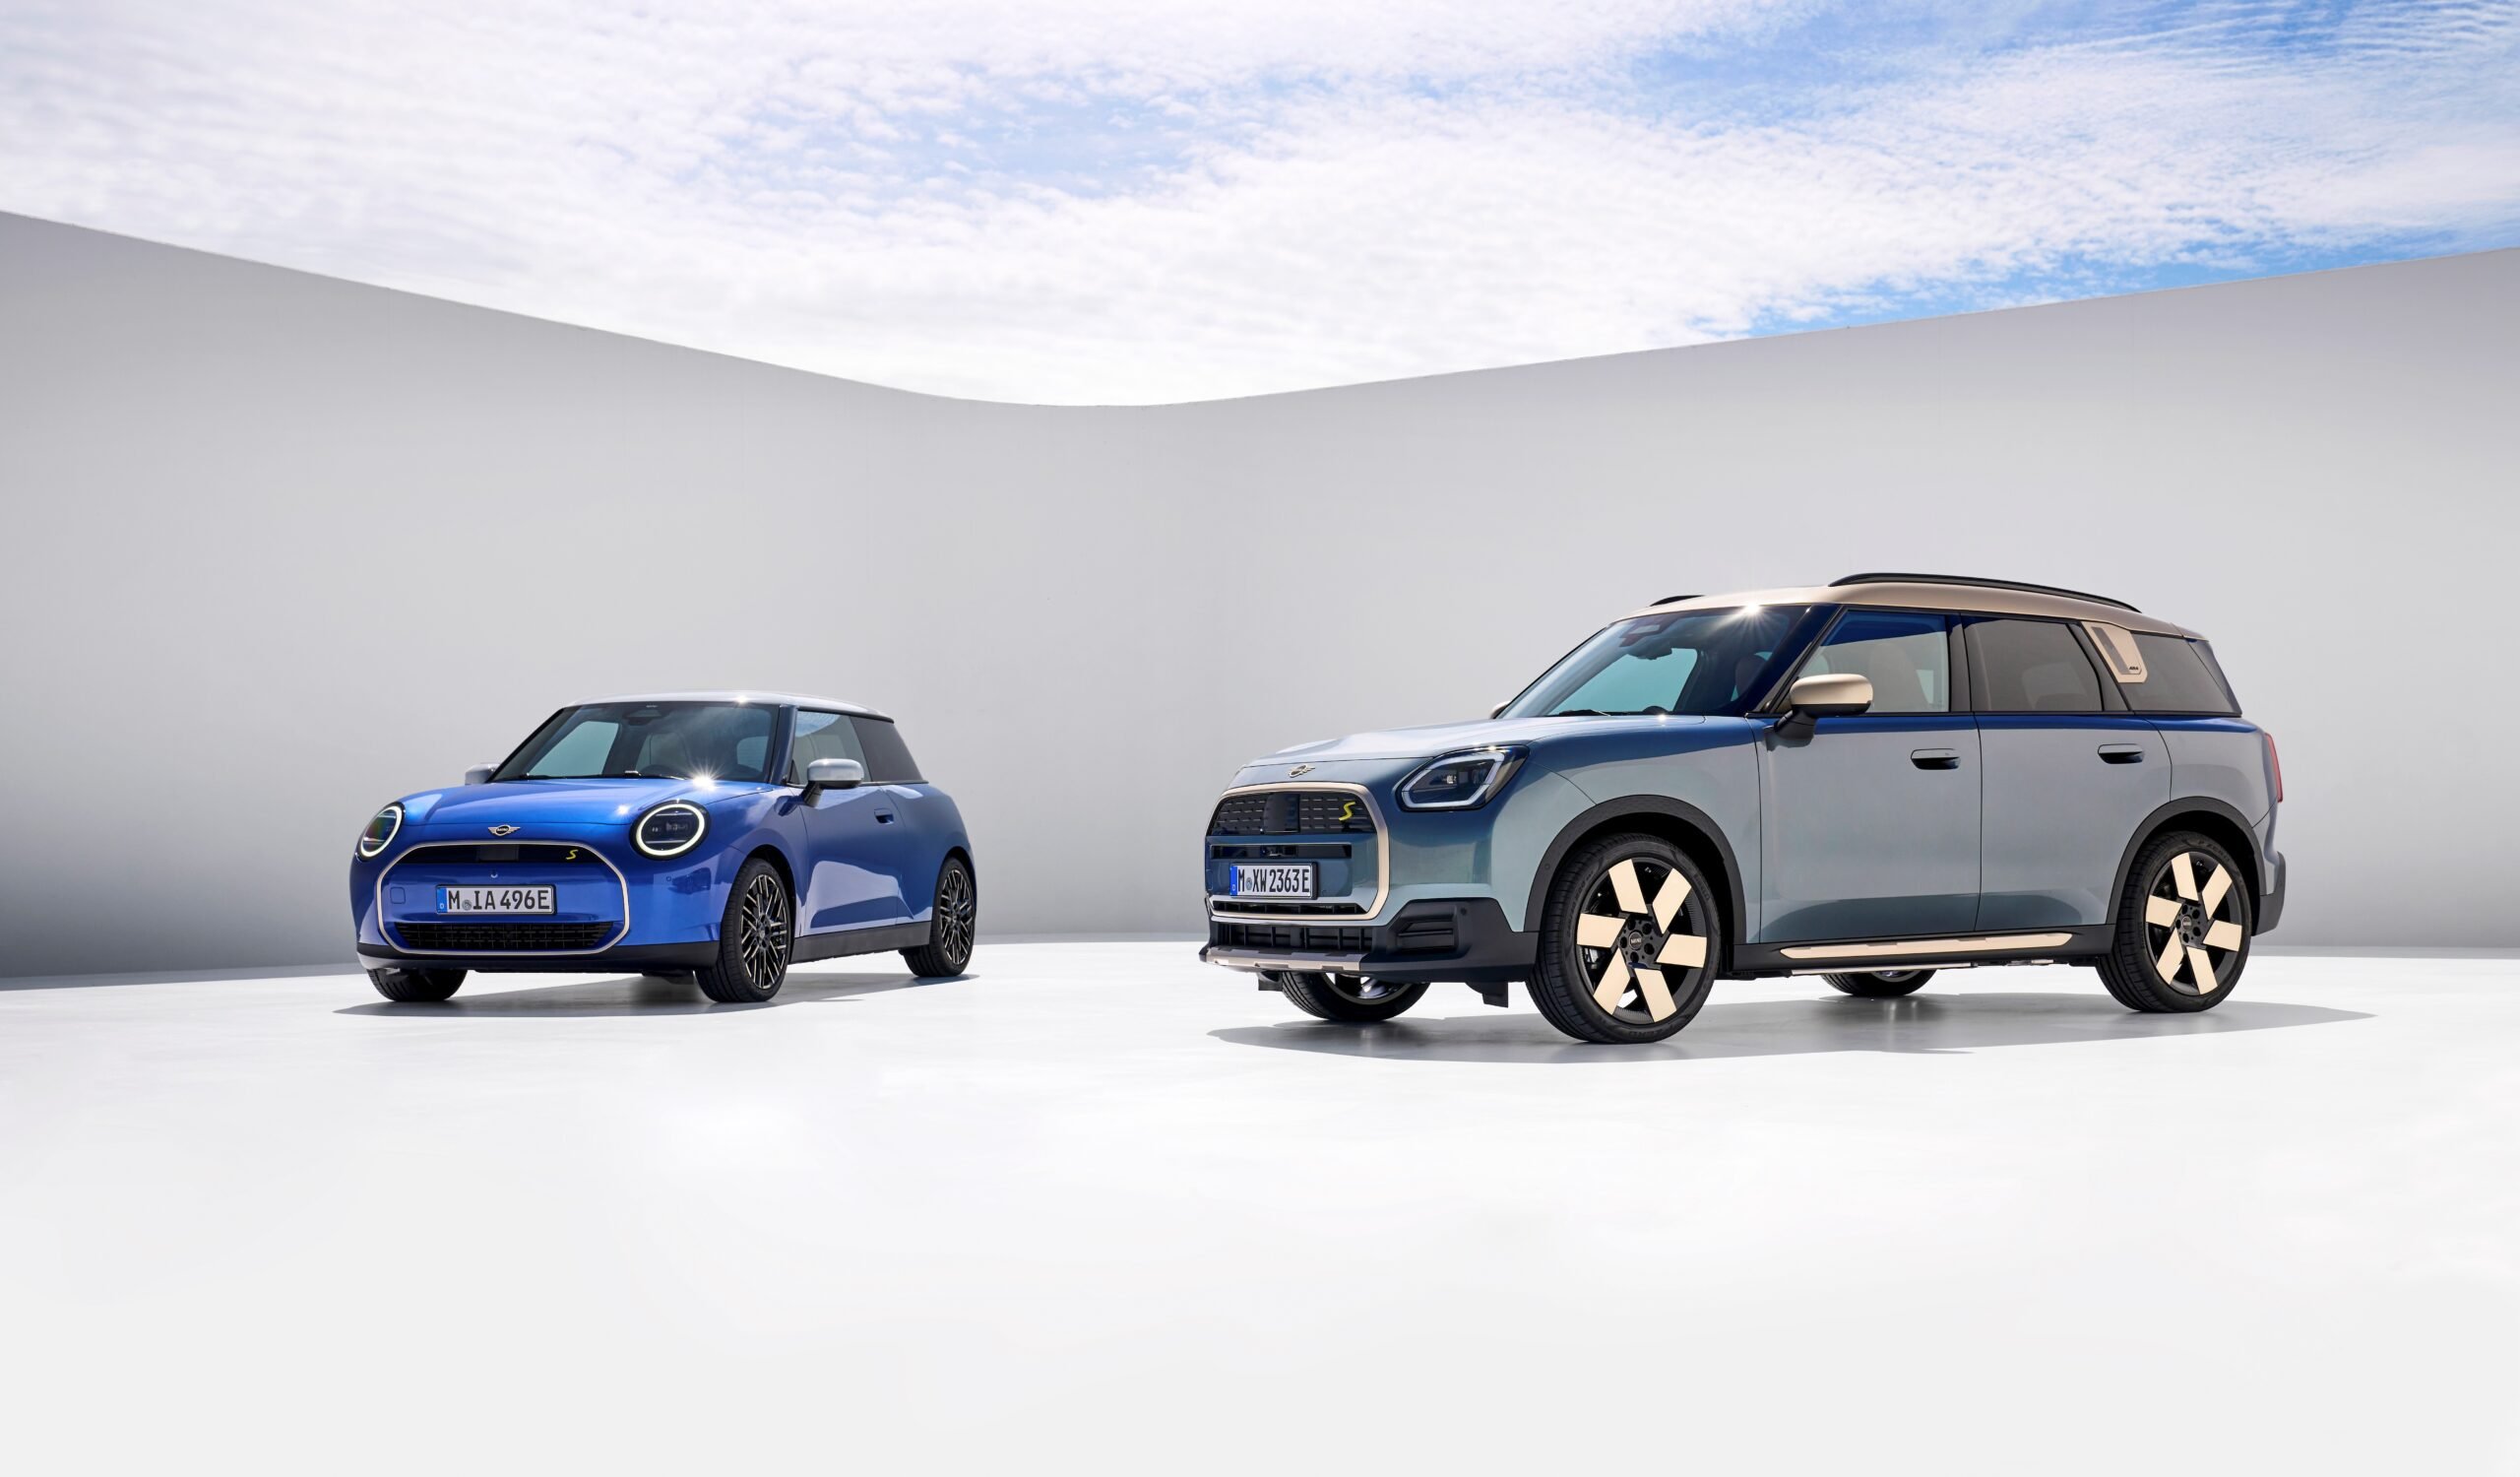 The new MINI family is innovative, digital and distinctive.